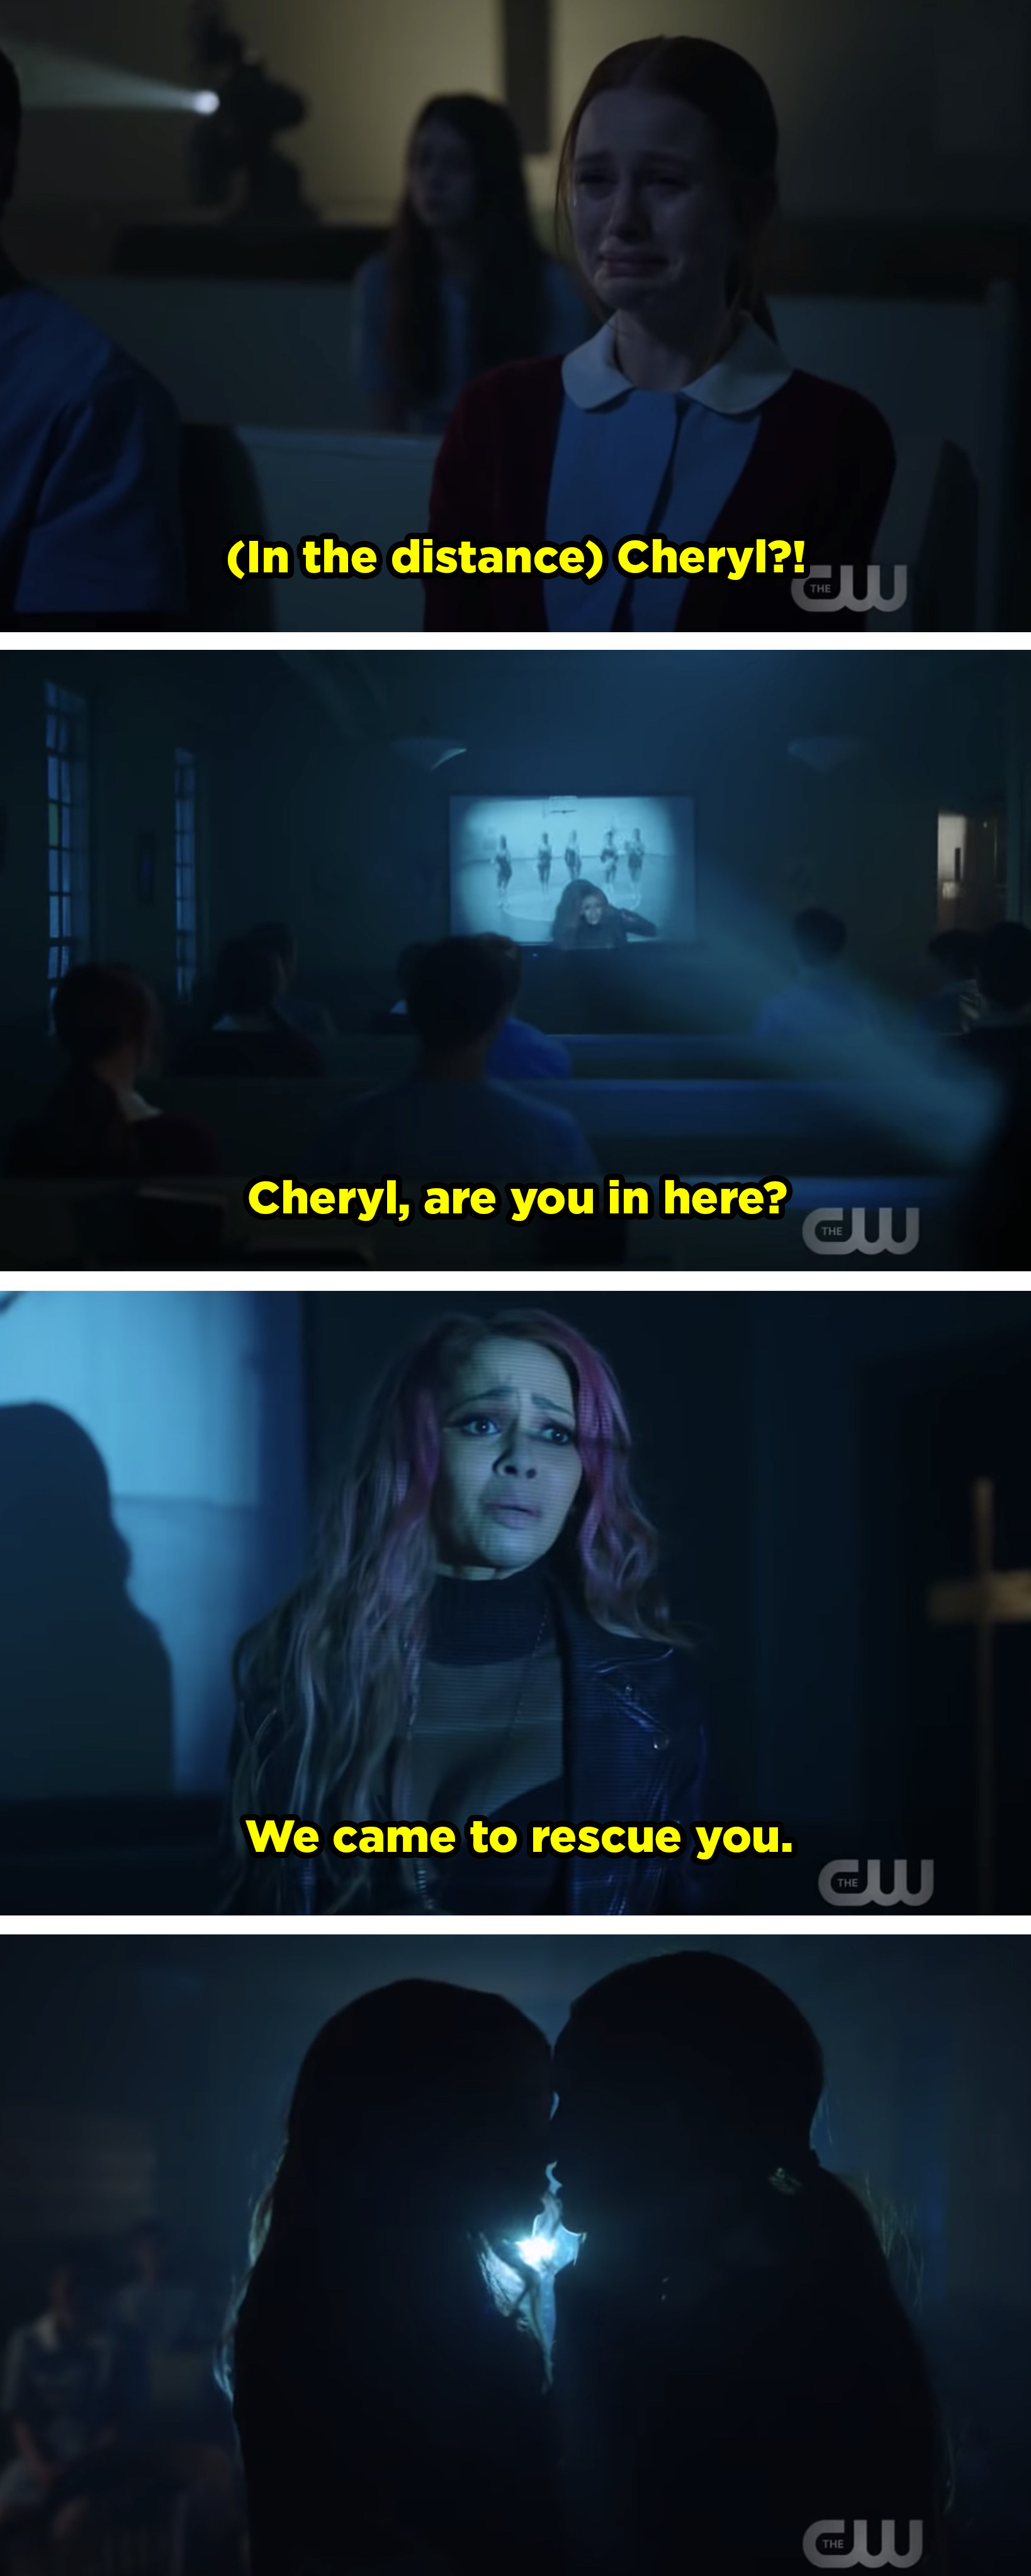 Toni bursts into the room where Cheryl is being held and she tells her they came to rescue her. Then, they kiss.